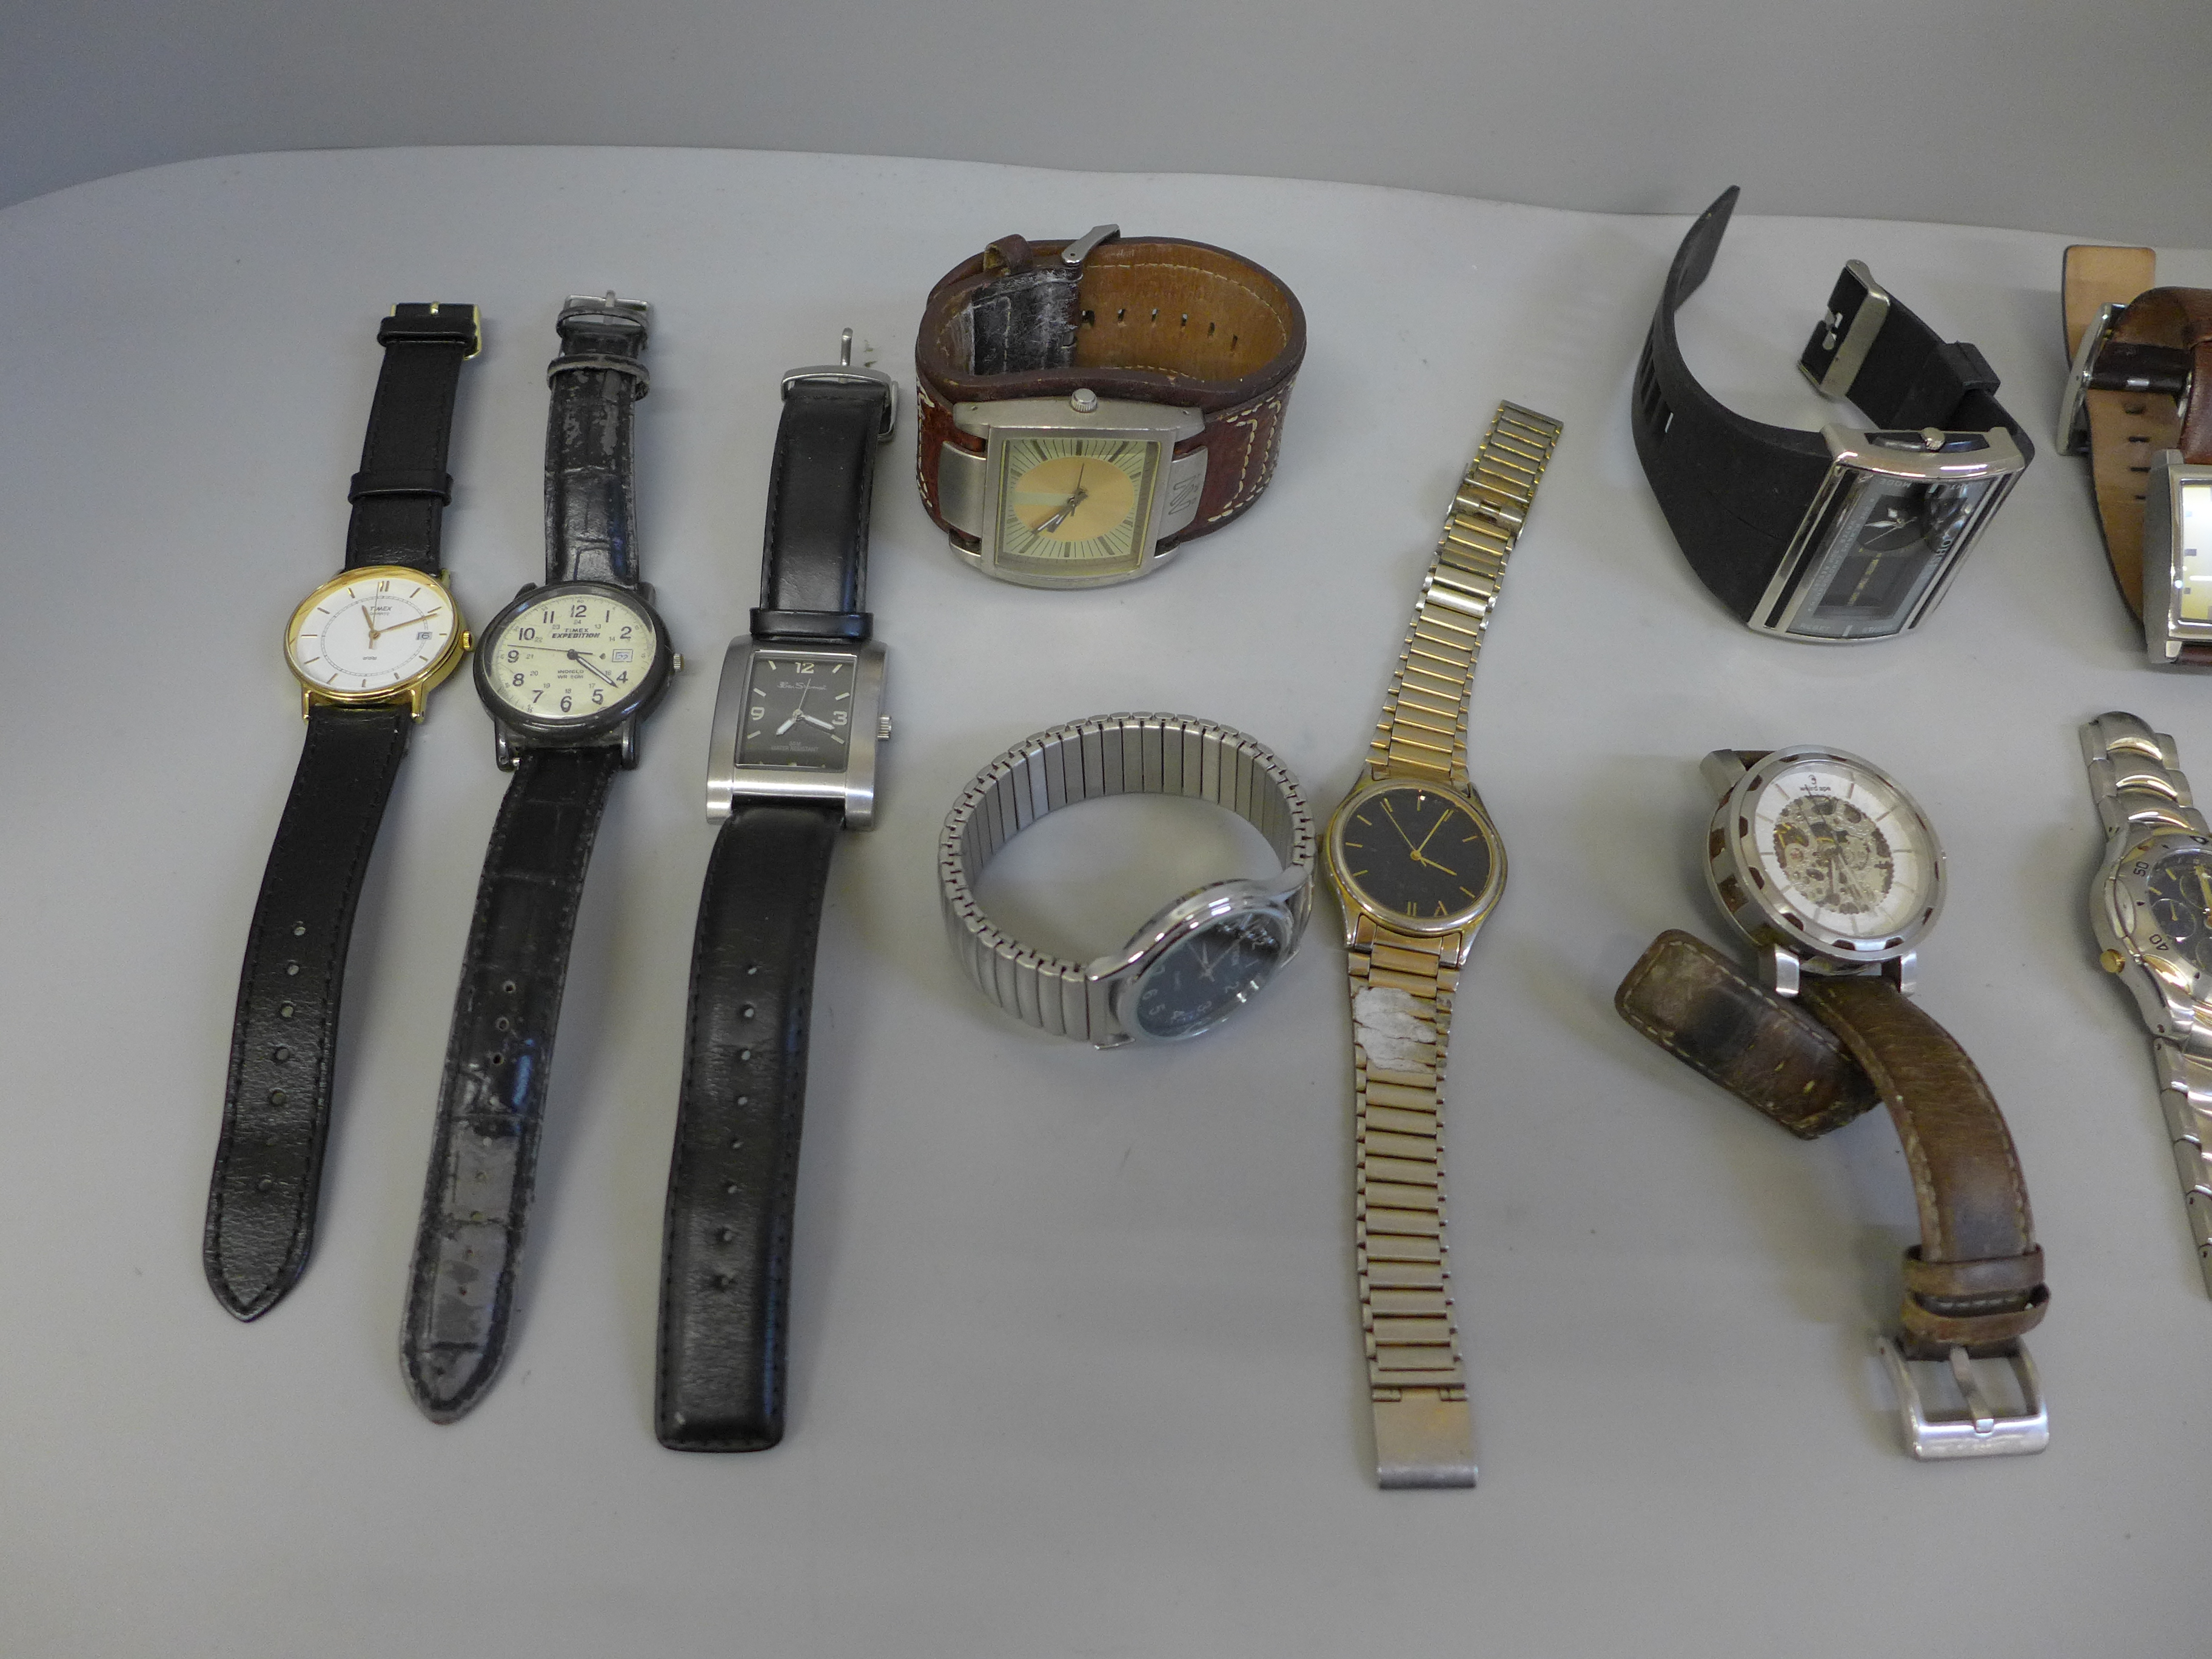 A collection of gentlemen's wristwatches including Times and Accurist - Image 3 of 3